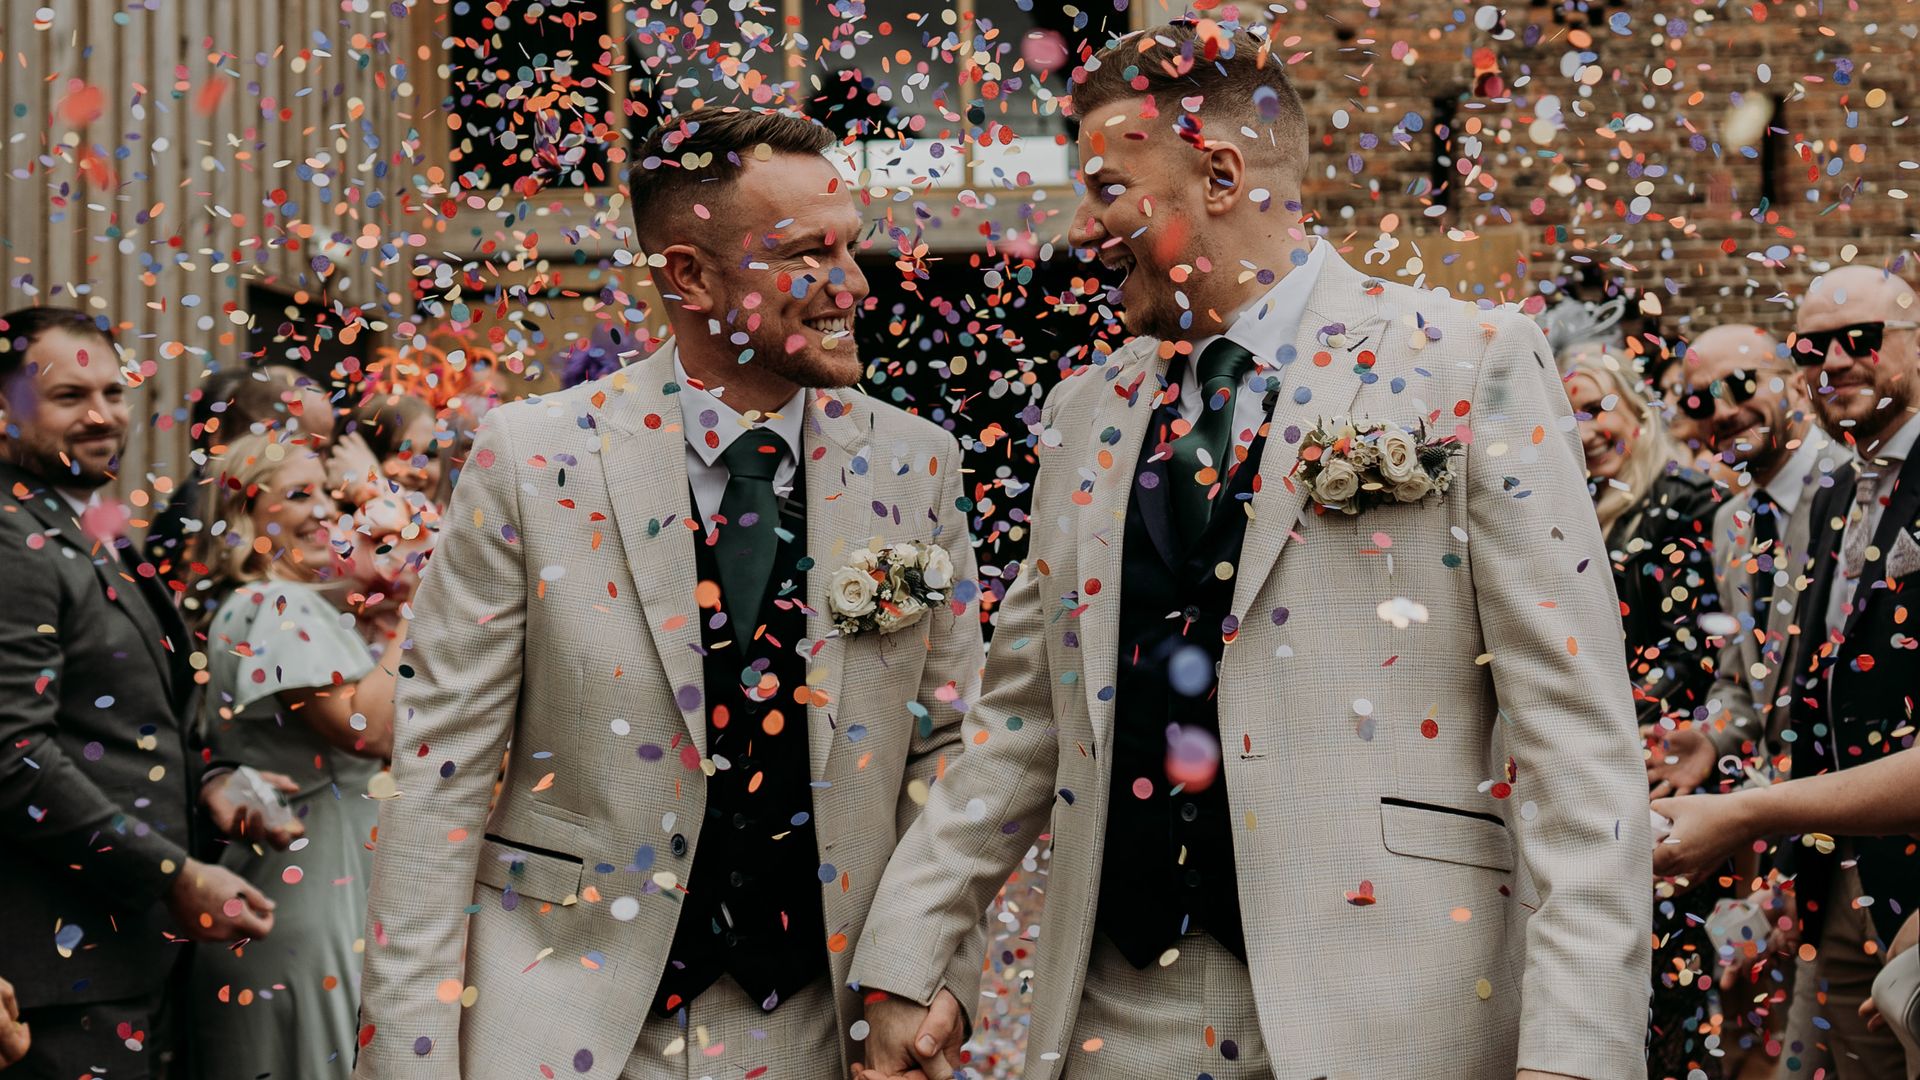 The grooms having confetti thrown over them